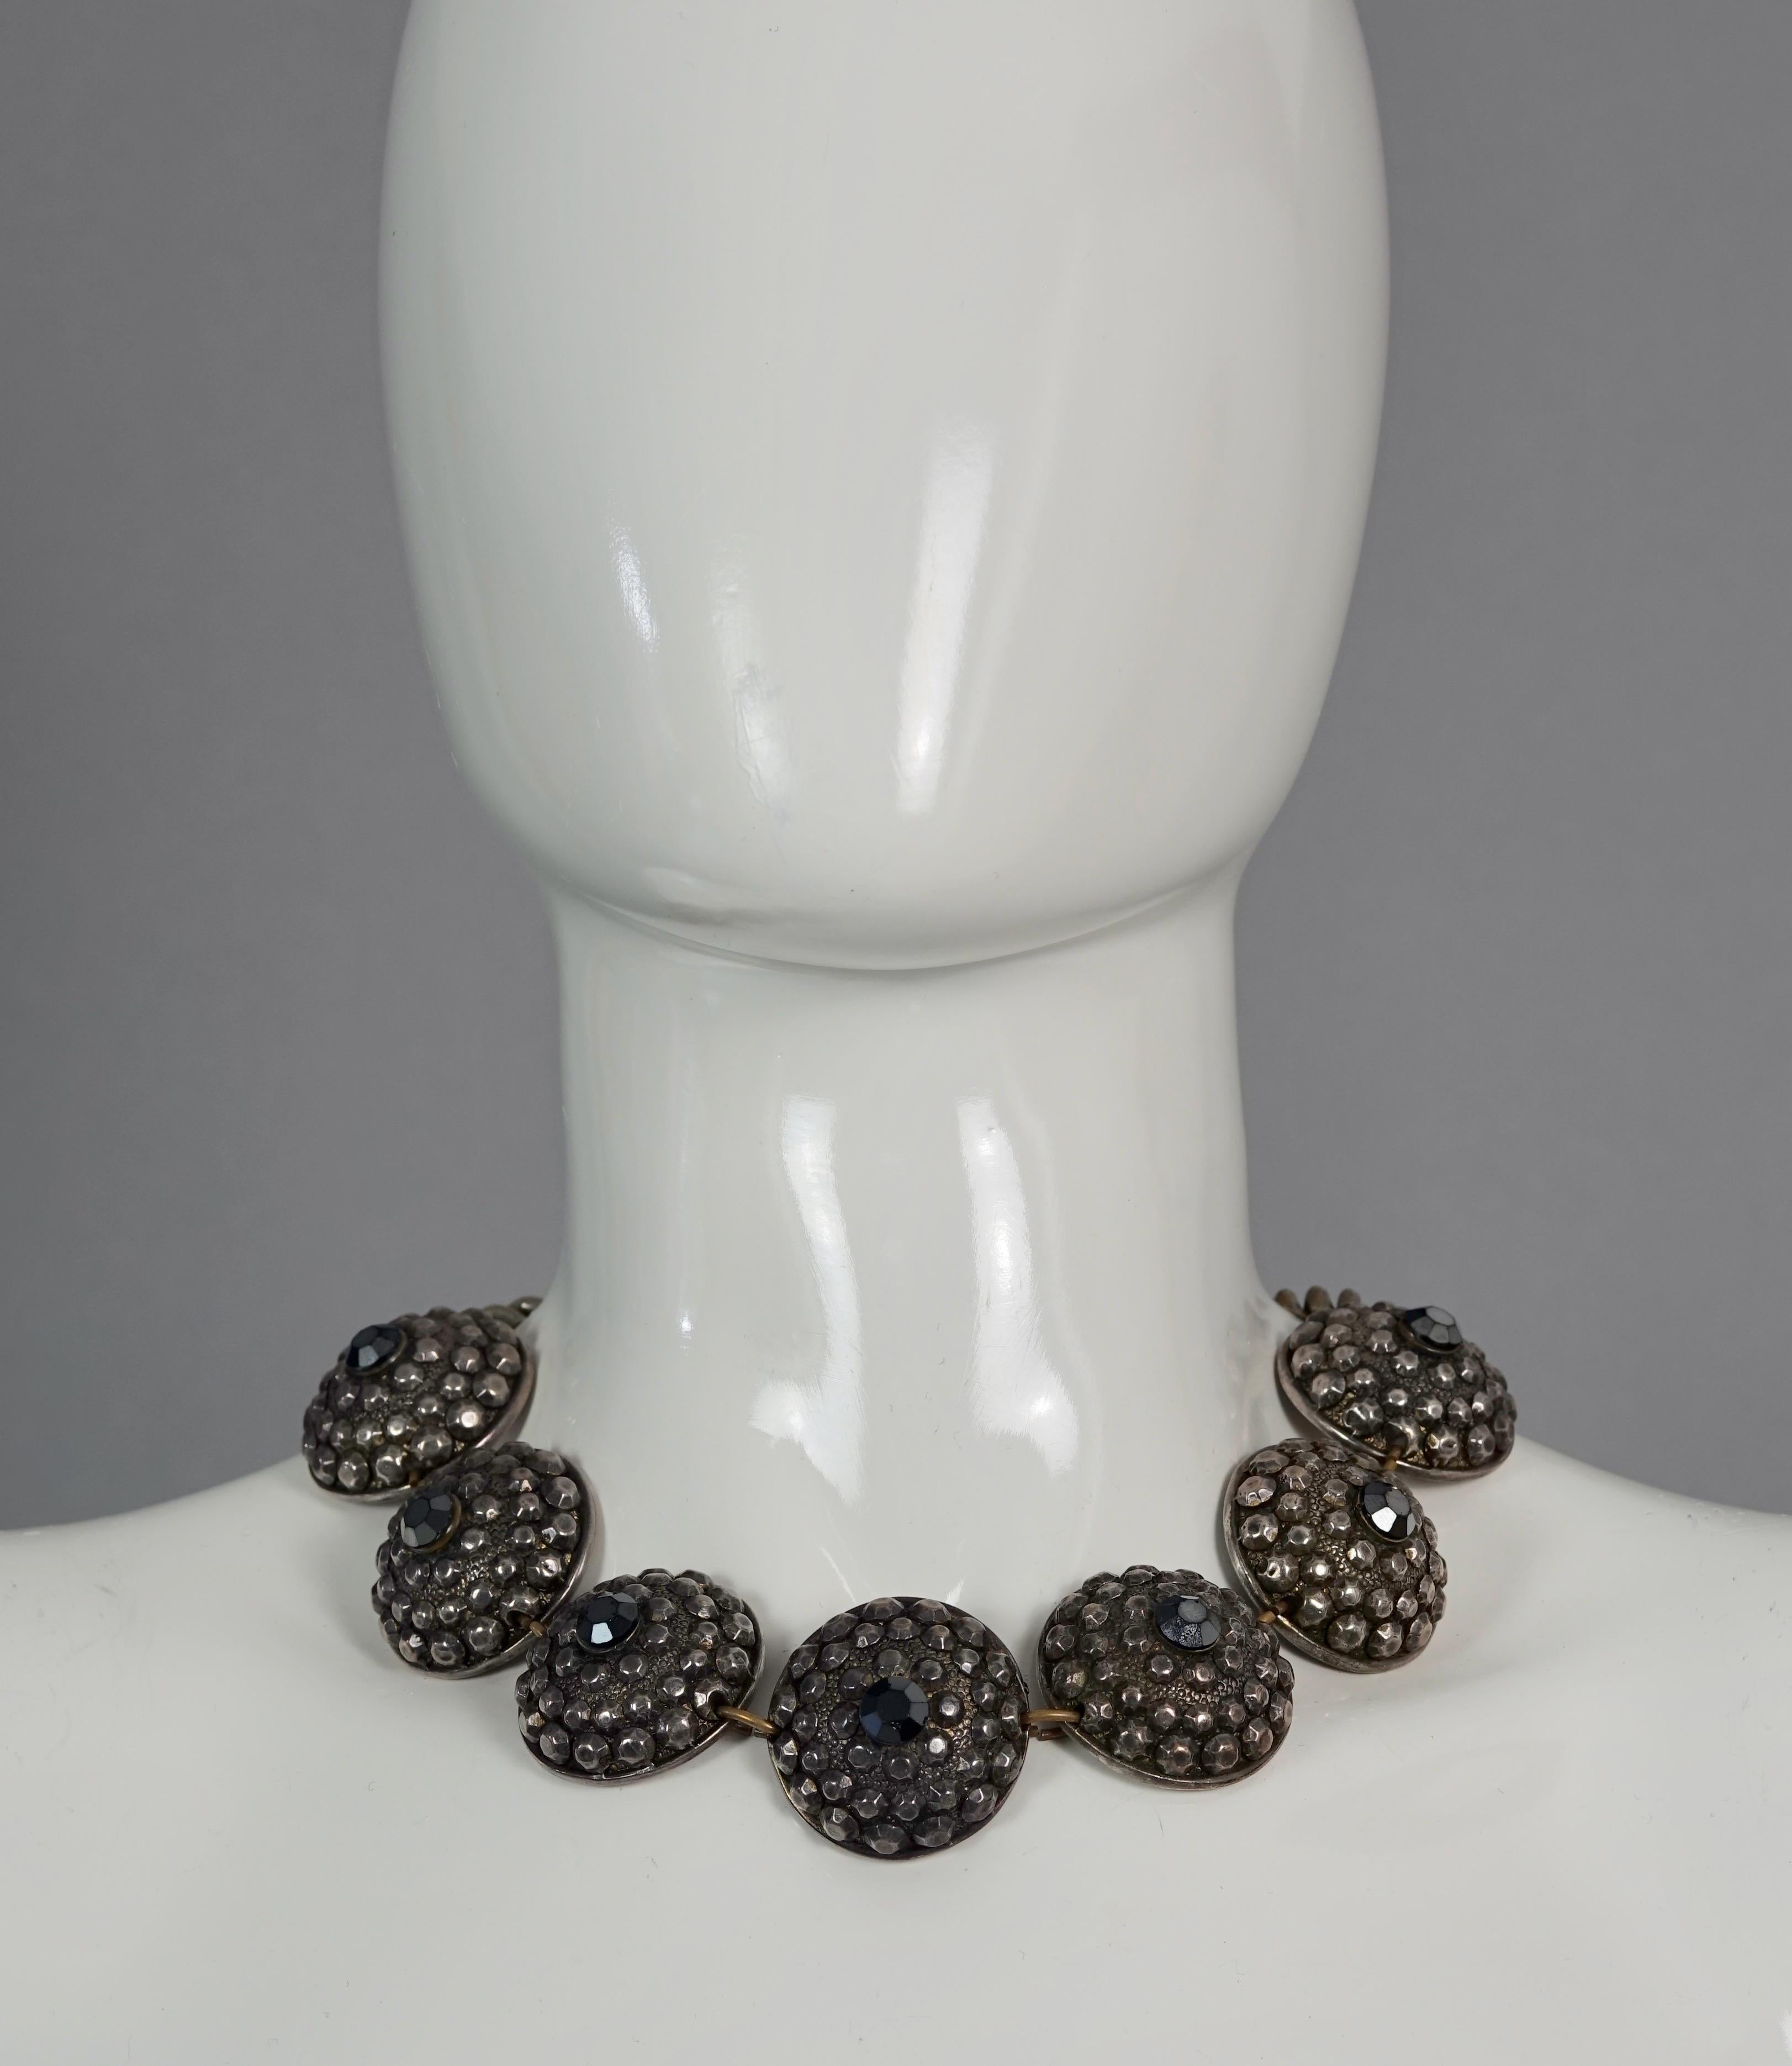 Vintage JEAN PAUL GAULTIER Ethnic Studded Disc Necklace

Measurements:
Height: 1.45 inches (3.7 cm)
Wearable Length: 18.11 inches (46 cm)

Features:
- 100% Authentic JEAN PAUL GAULTIER.
- Ethnic inspired disc link necklace with studs and black